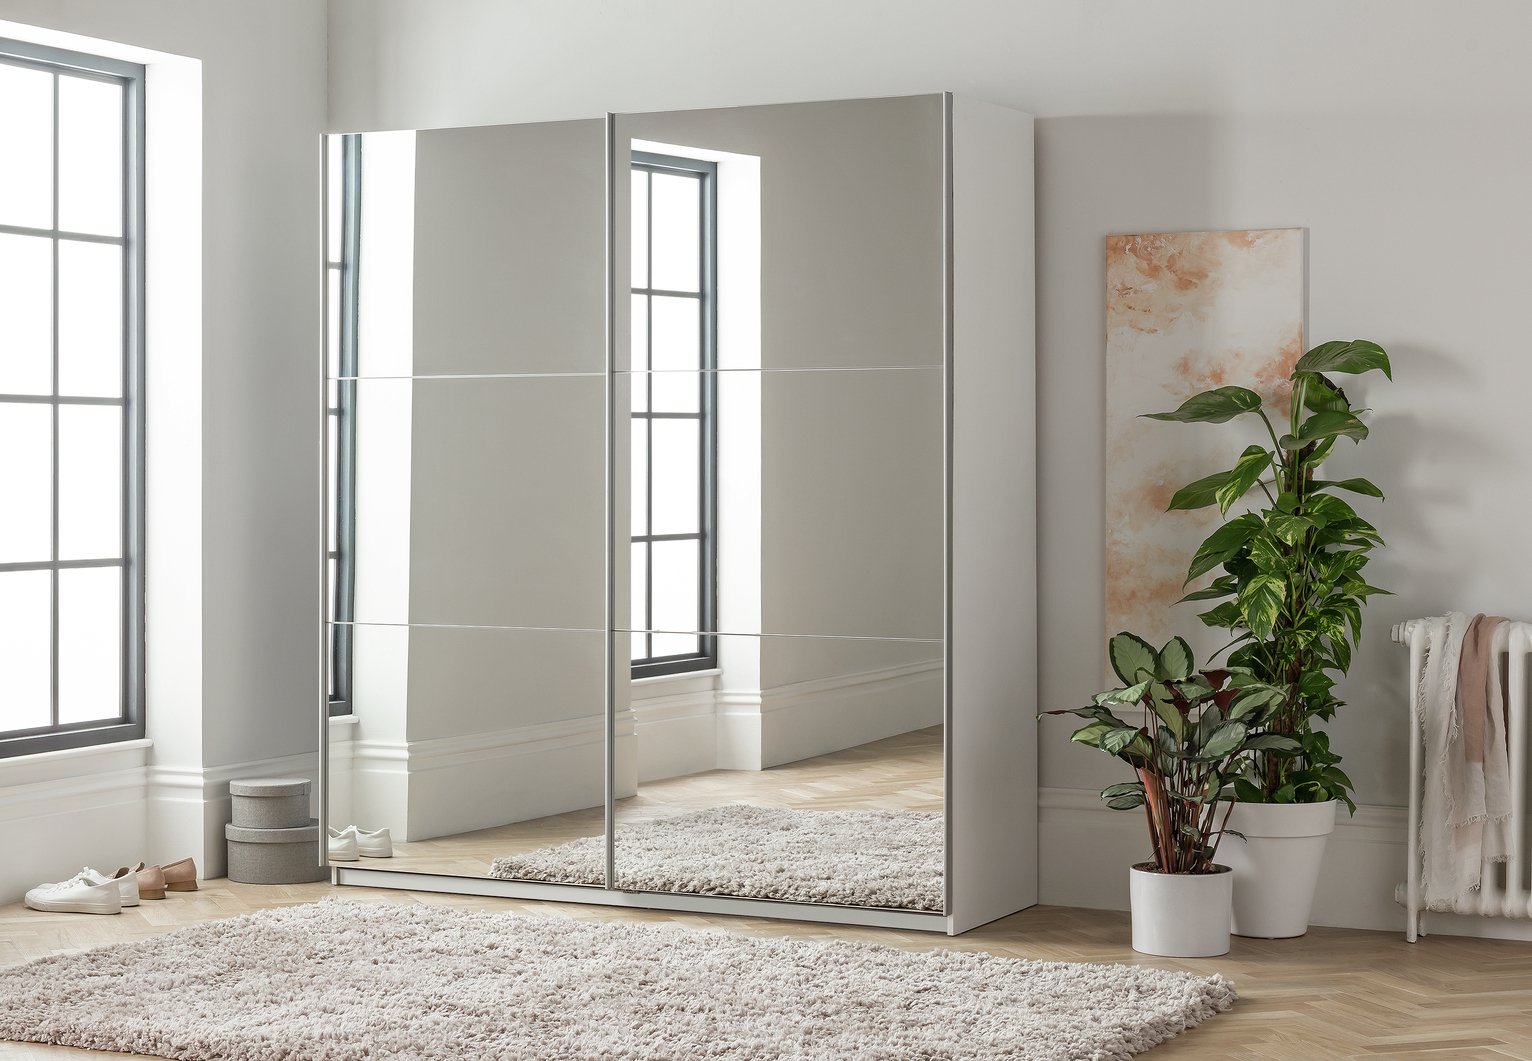 Argos Home Holsted Mirrored Large Sliding Wardrobe Review